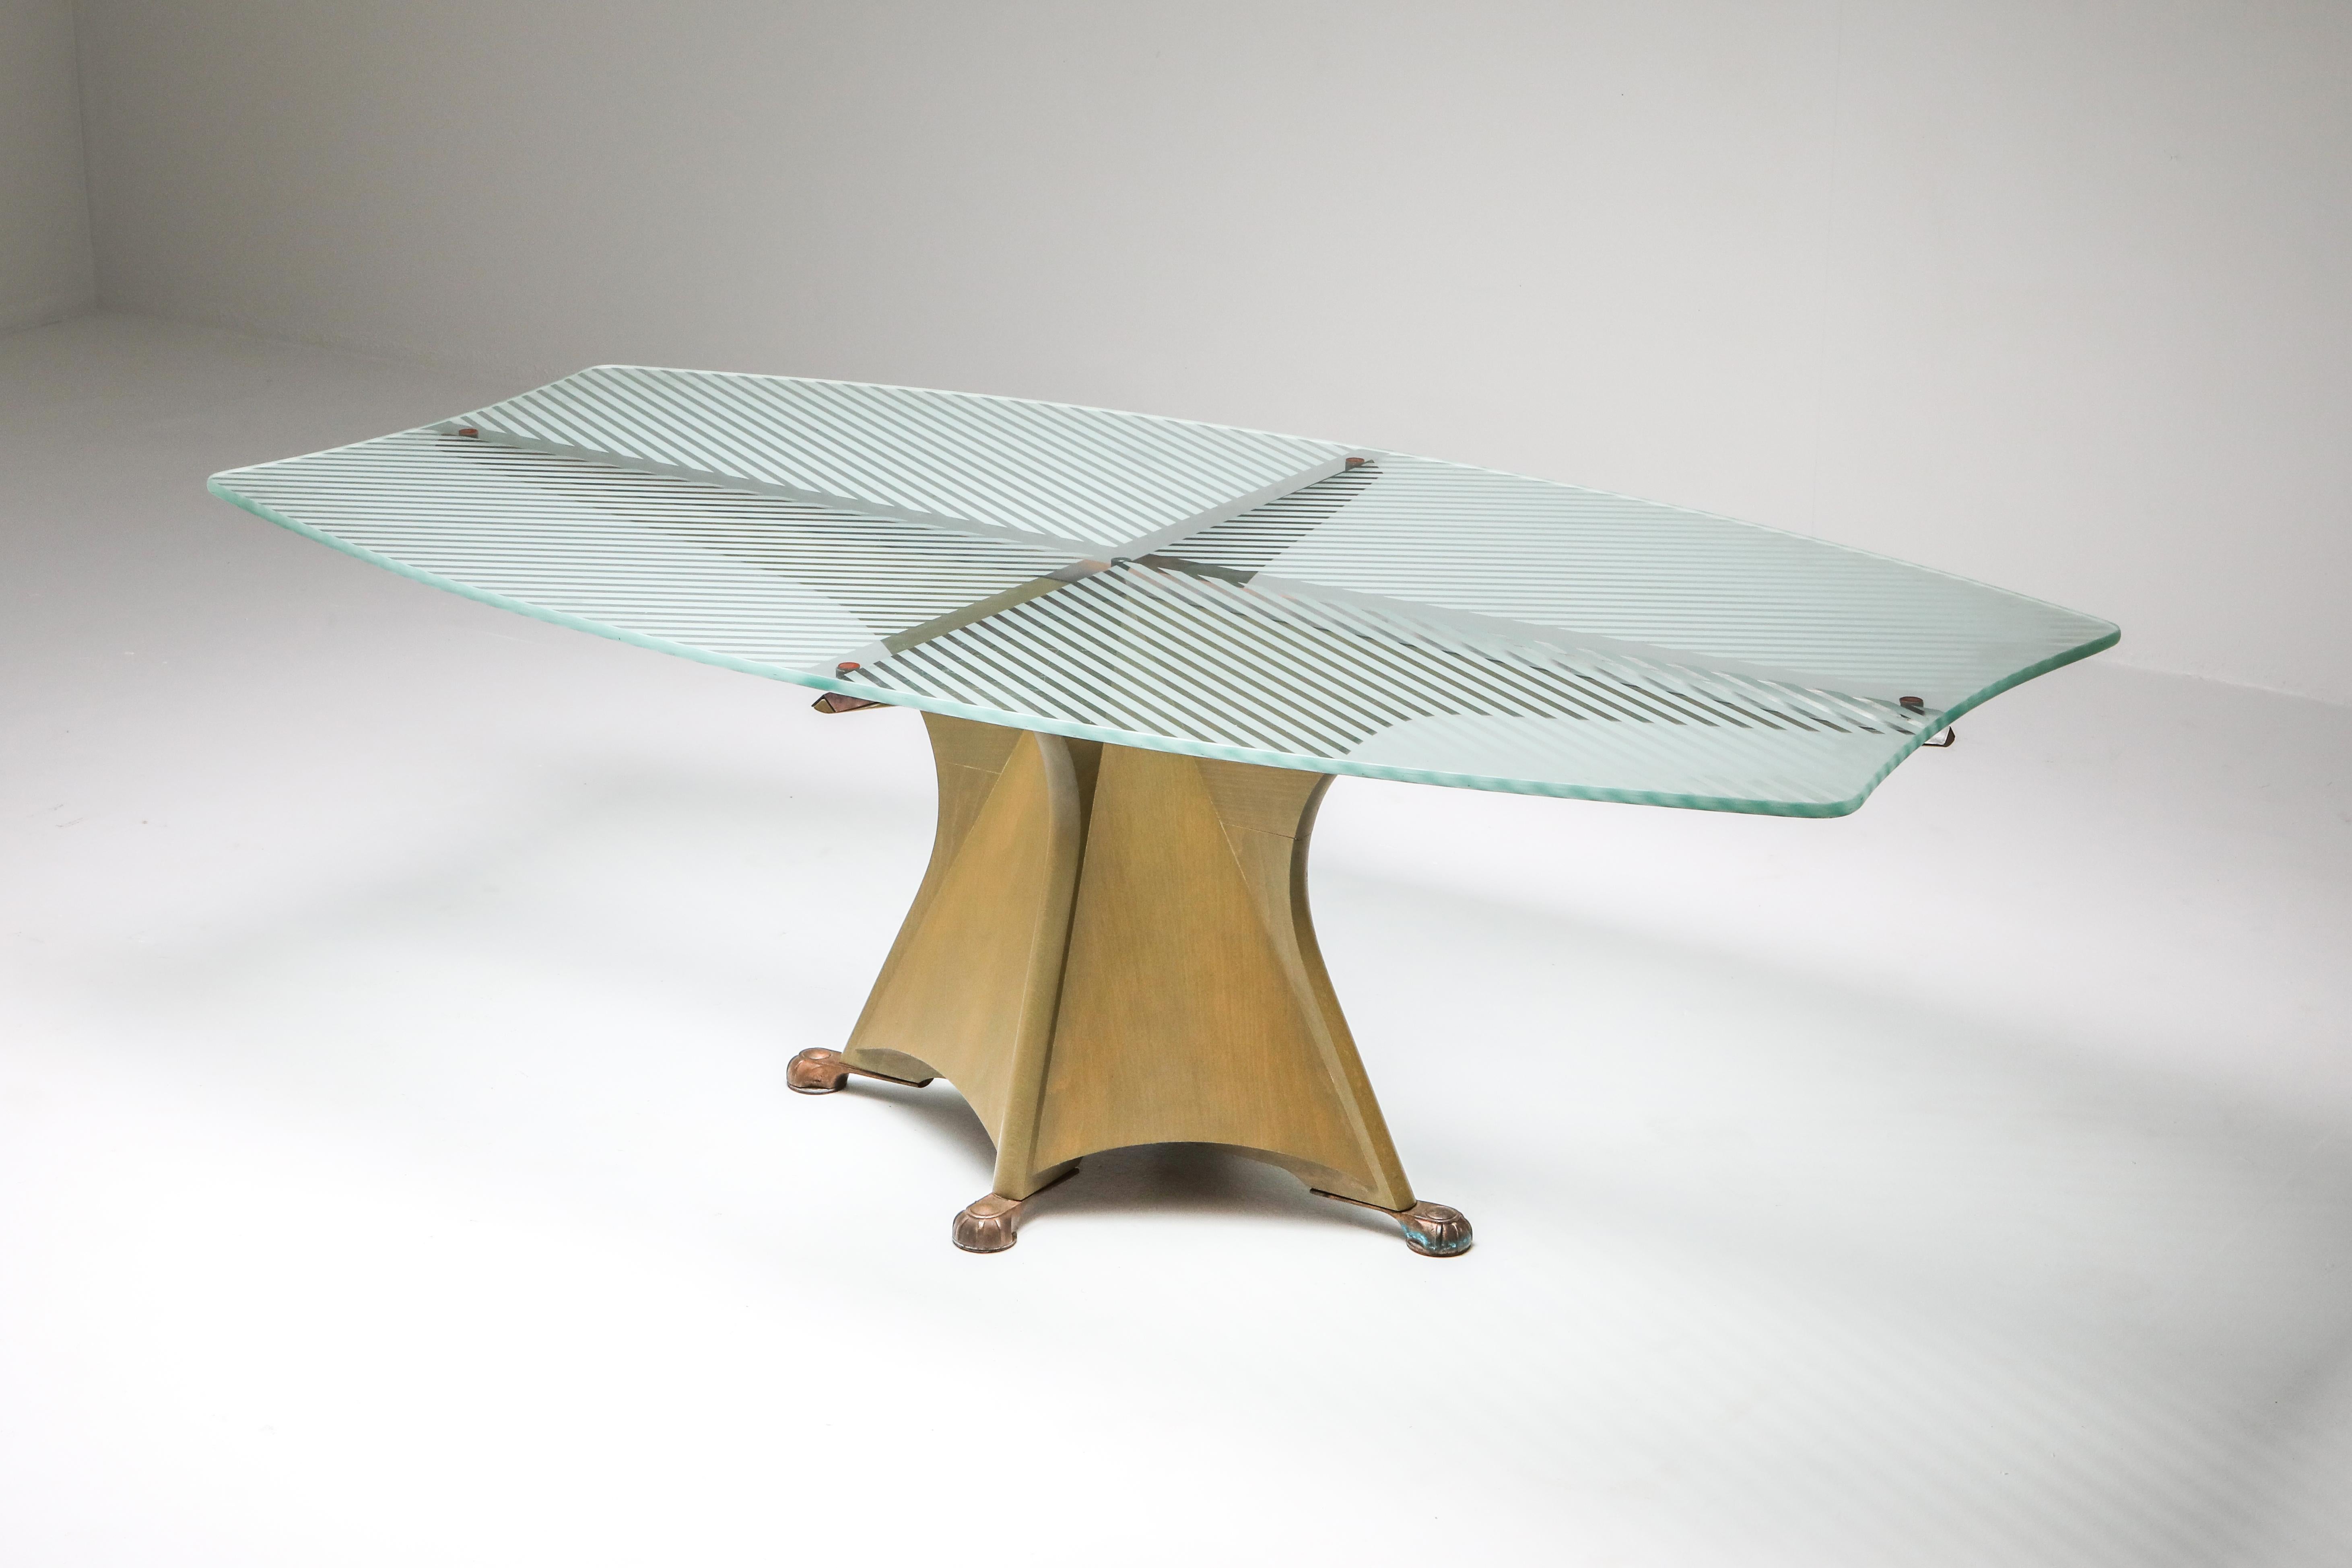 Gaudi inspired dining table by Oscar Tusquets Blanca, Spain, 1985
Free flowing Catalan post-modernism.
Painted wooden base, etched glass top and bronze feet. Manufactured by Casas.
(This is the first edition of this model as it was later produced